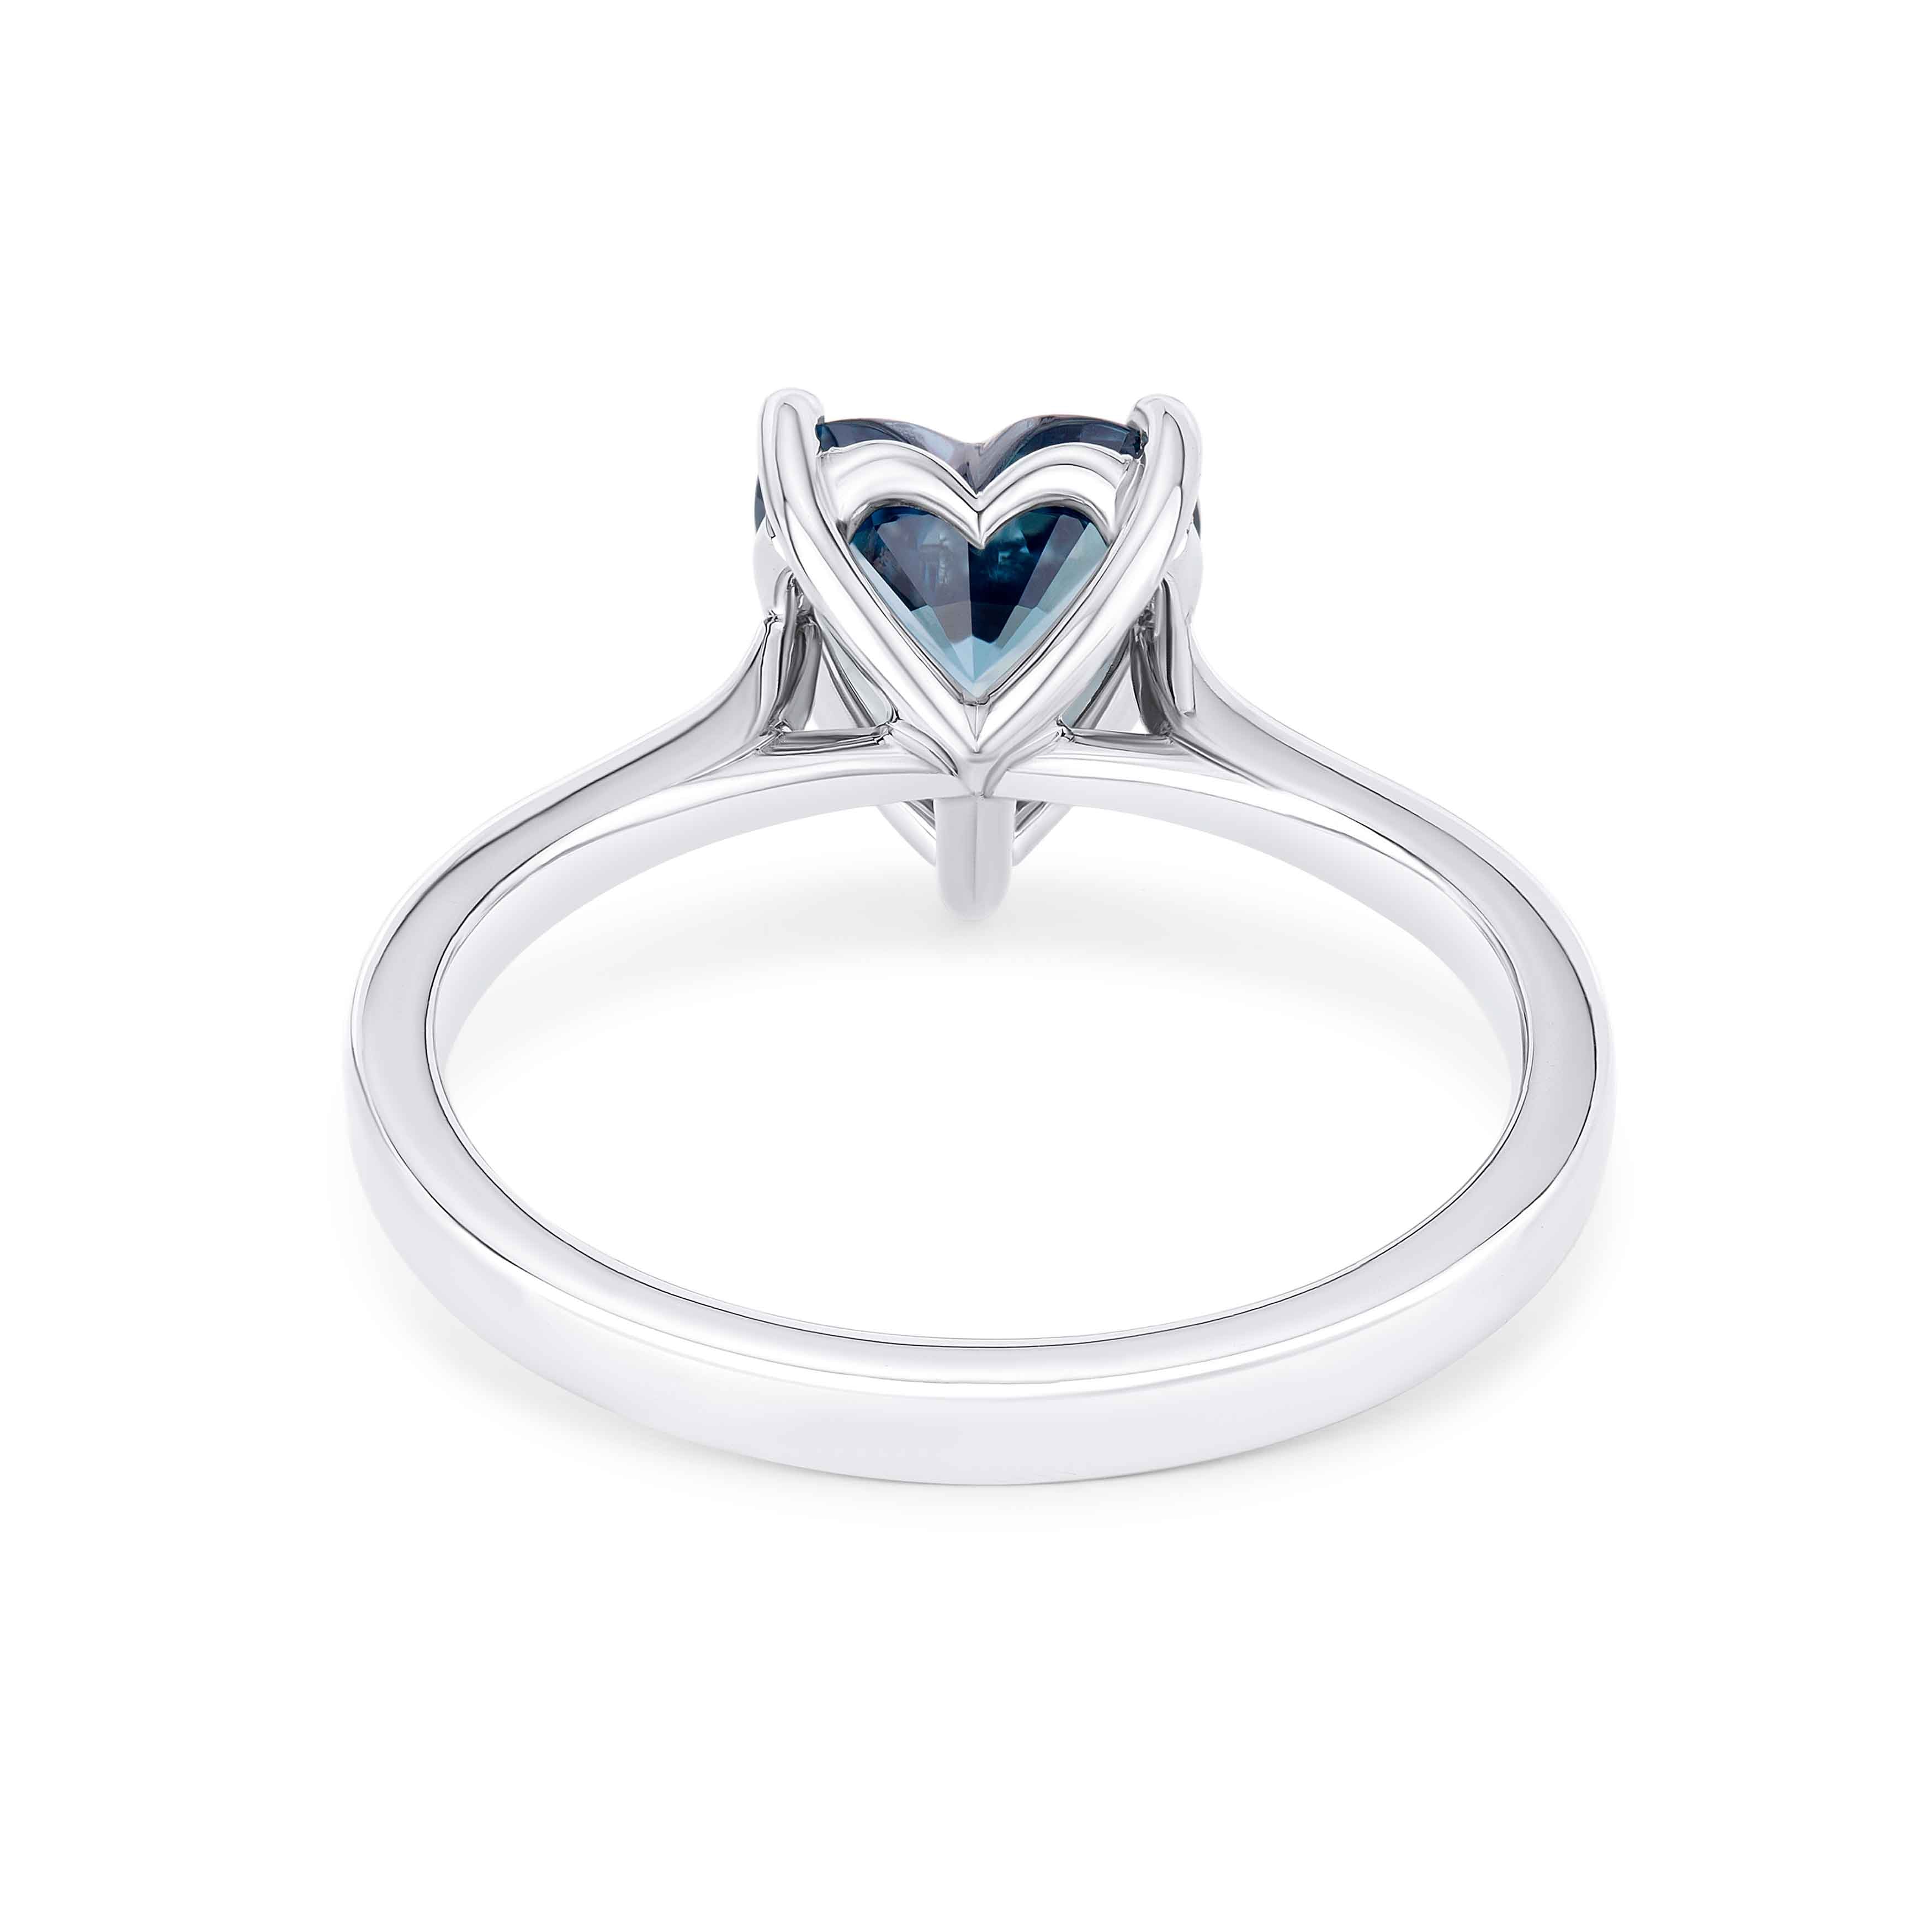 Moira Patience Fine Jewellery Heart Shaped Teal Sapphire Engagement Ring 